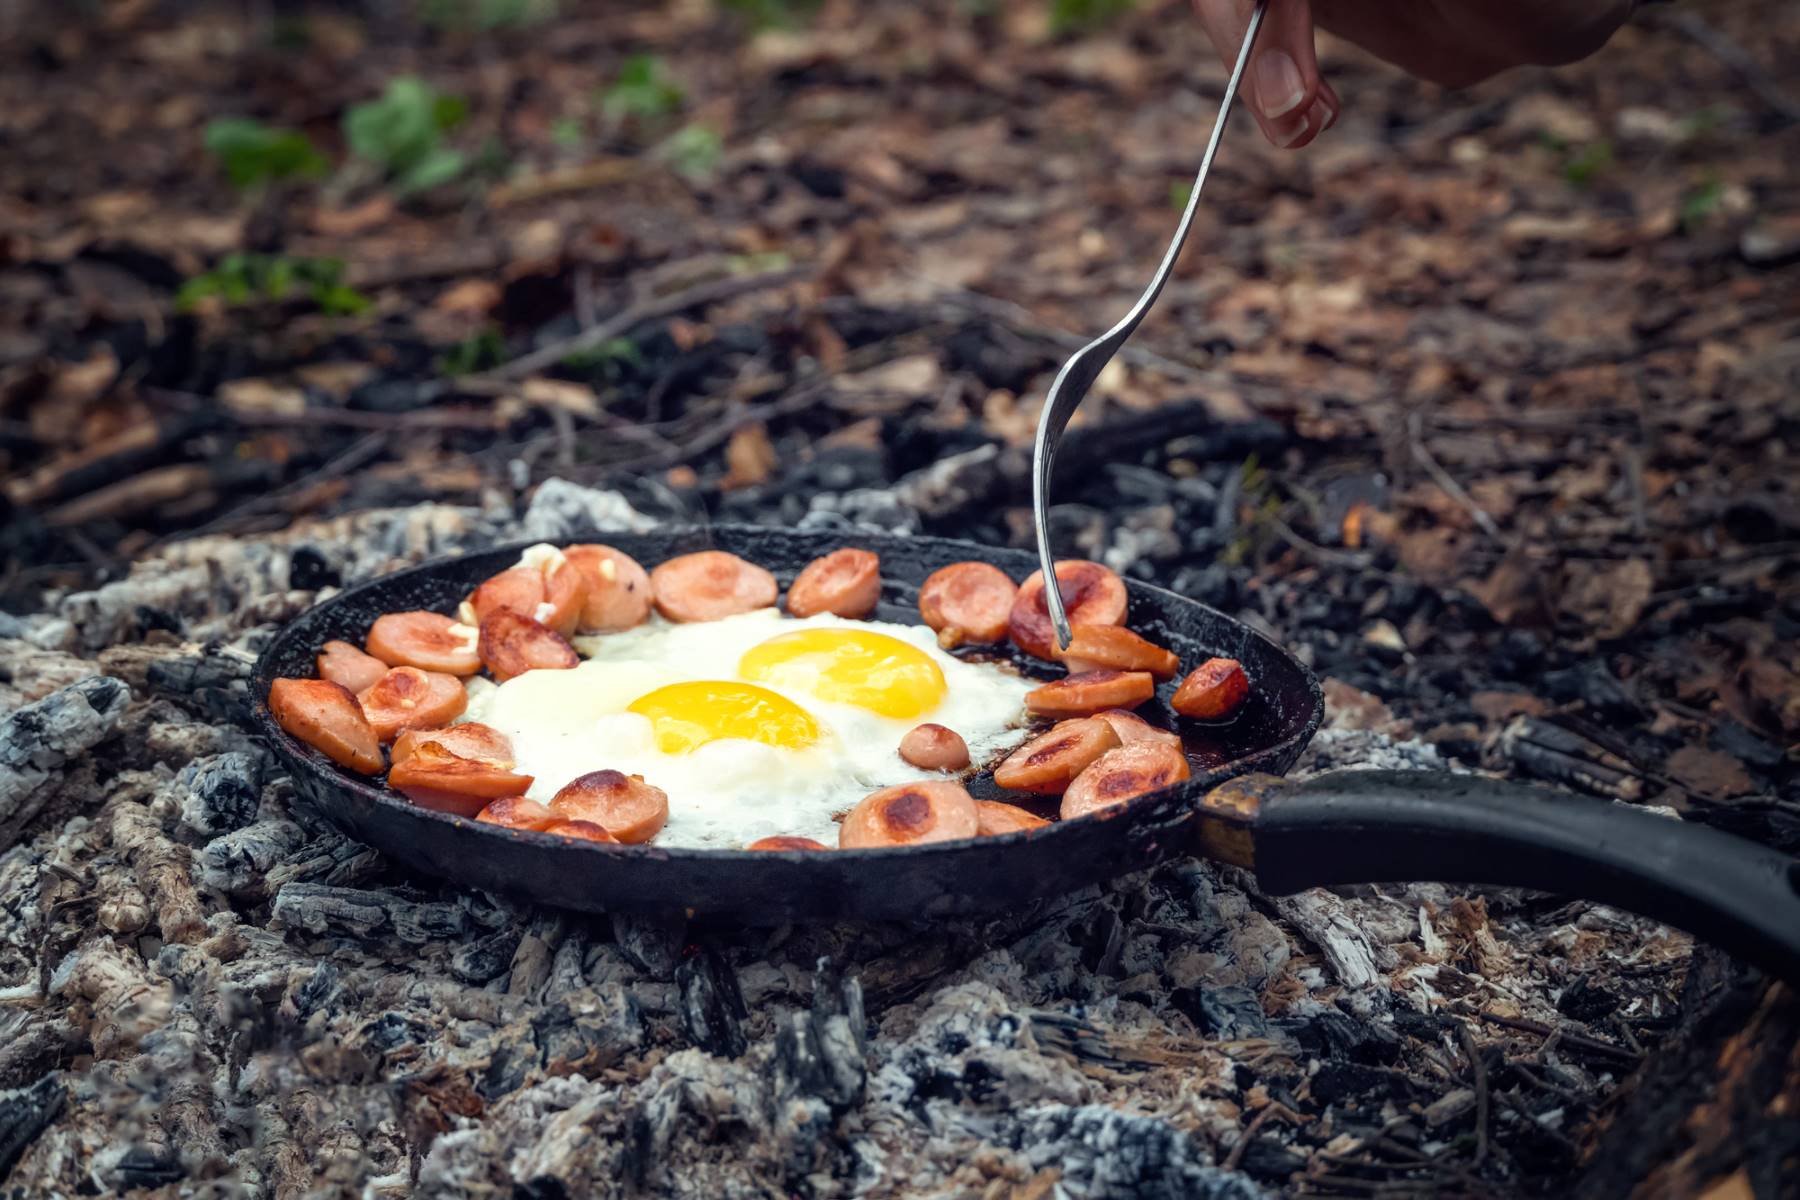 Eggs and sausage cooking in a camping frying pan over hot coals